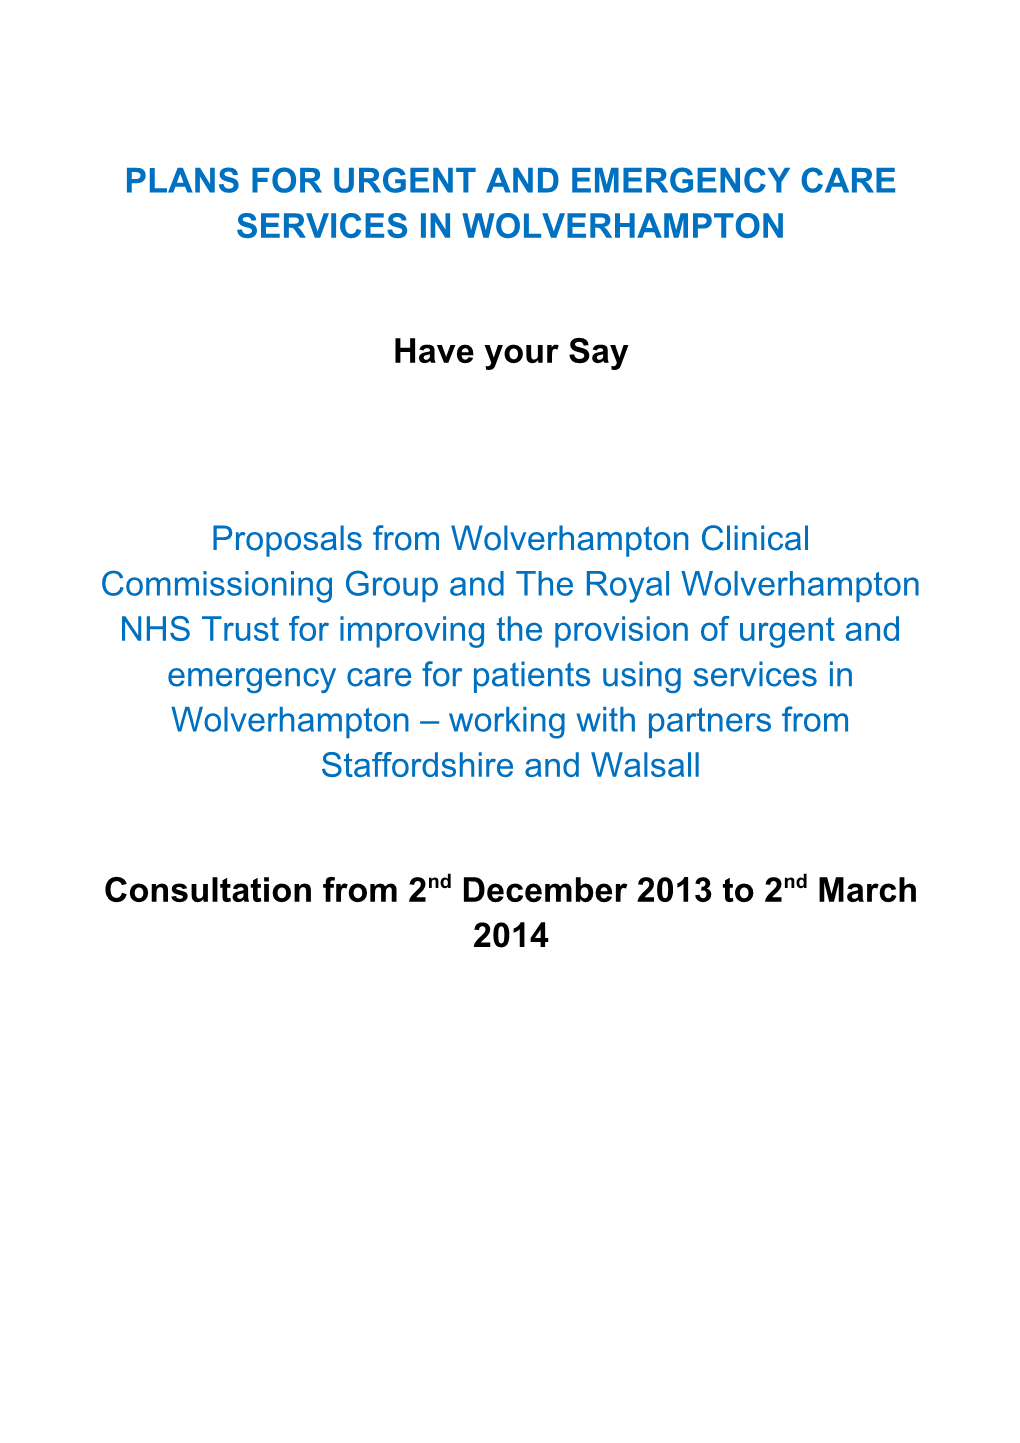 Plans for Urgent and Emergency Care Services in Wolverhampton